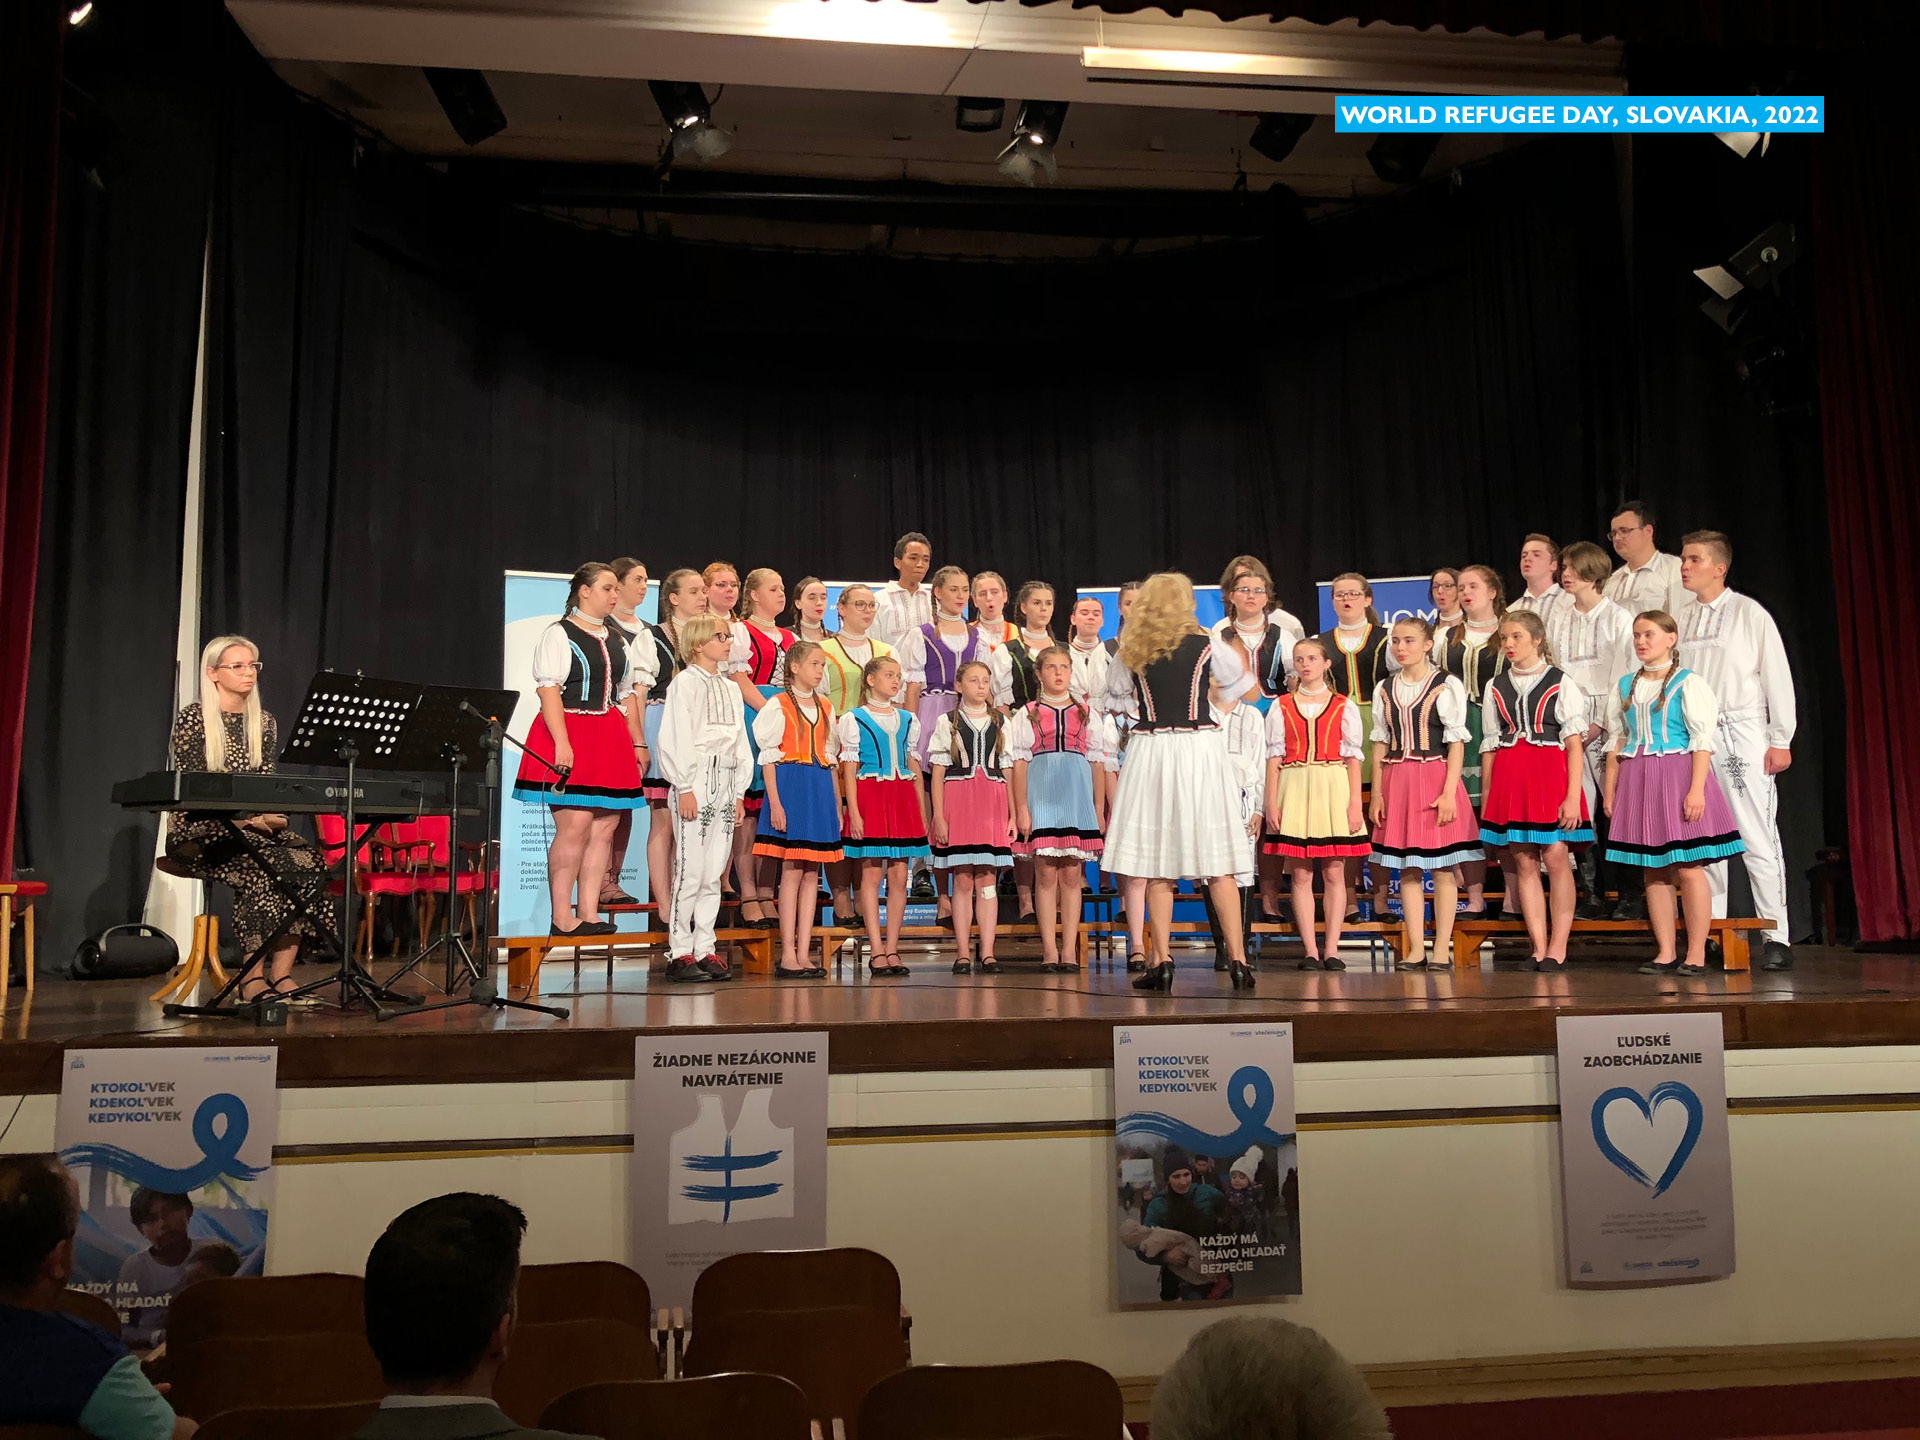 Choir Magnolia performance at the event in Košice – World Refuee Day 2022. Photo © International Organization for Migration (IOM) 2022.